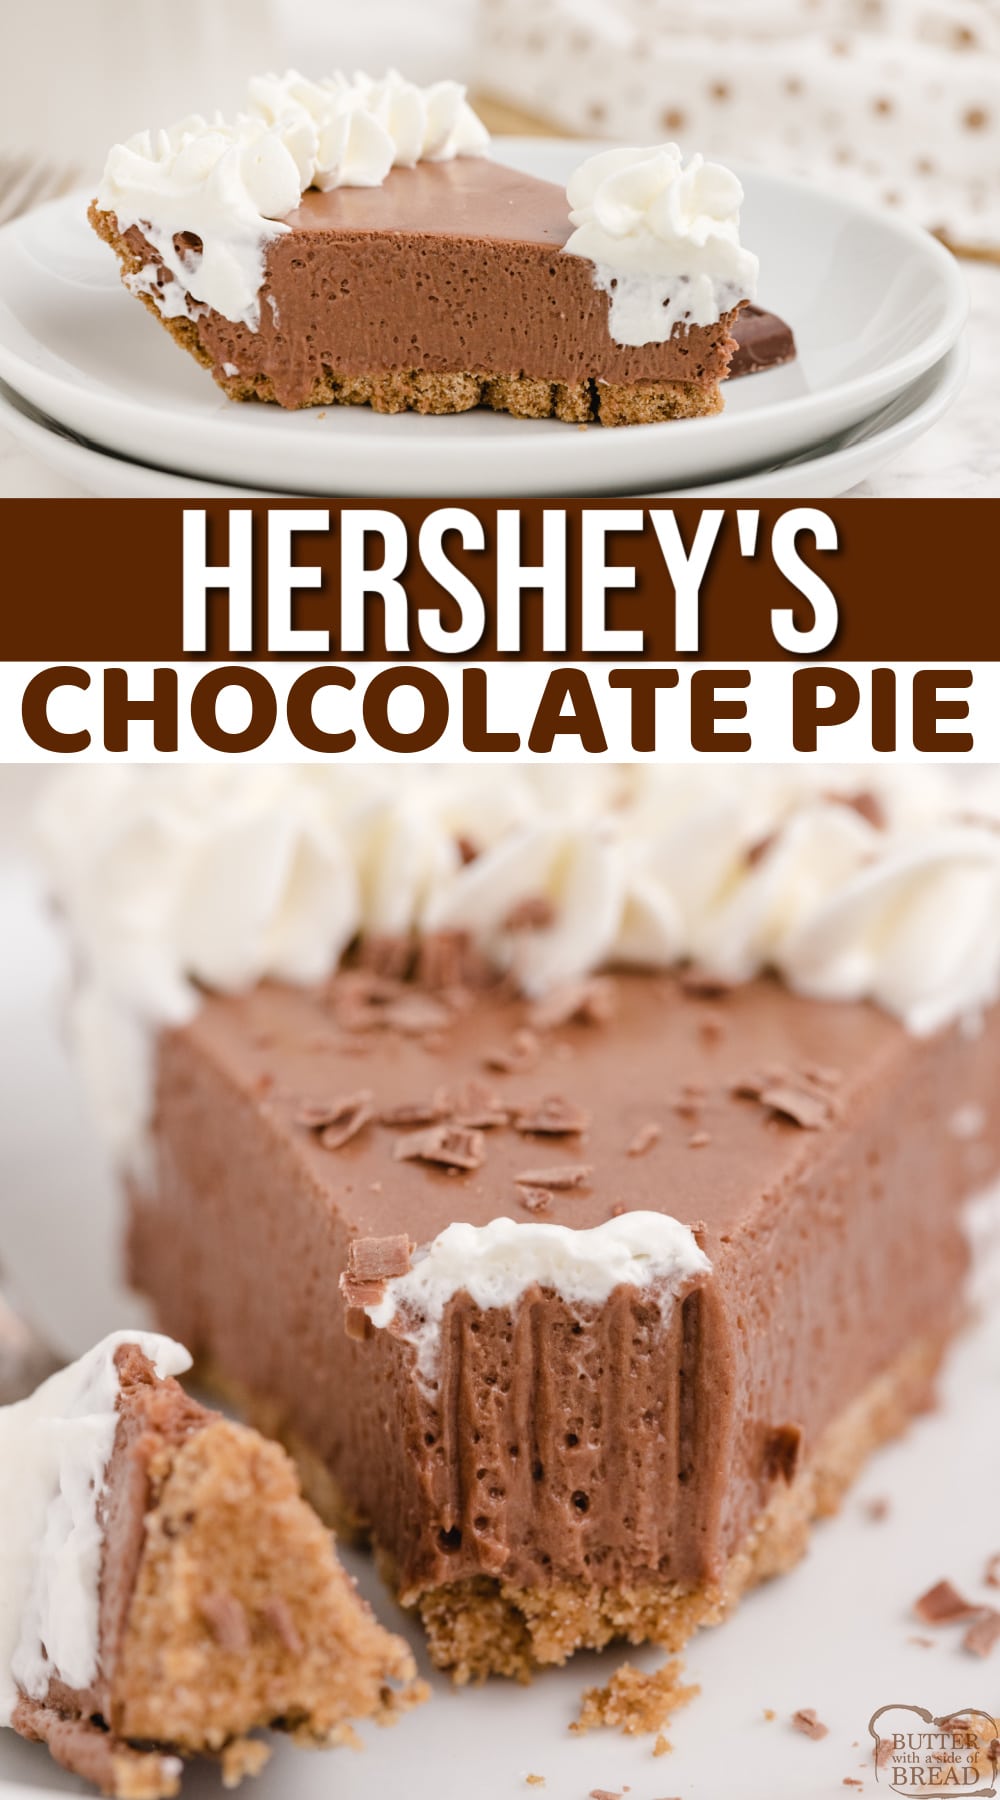 Hershey Chocolate Pie is a no-bake chocolate pie made with melted marshmallows, melted Hershey bars and real whipped cream in a graham cracker crust. This easy chocolate pie recipe is so simple to make and is rich, chocolatey and absolutely delicious!